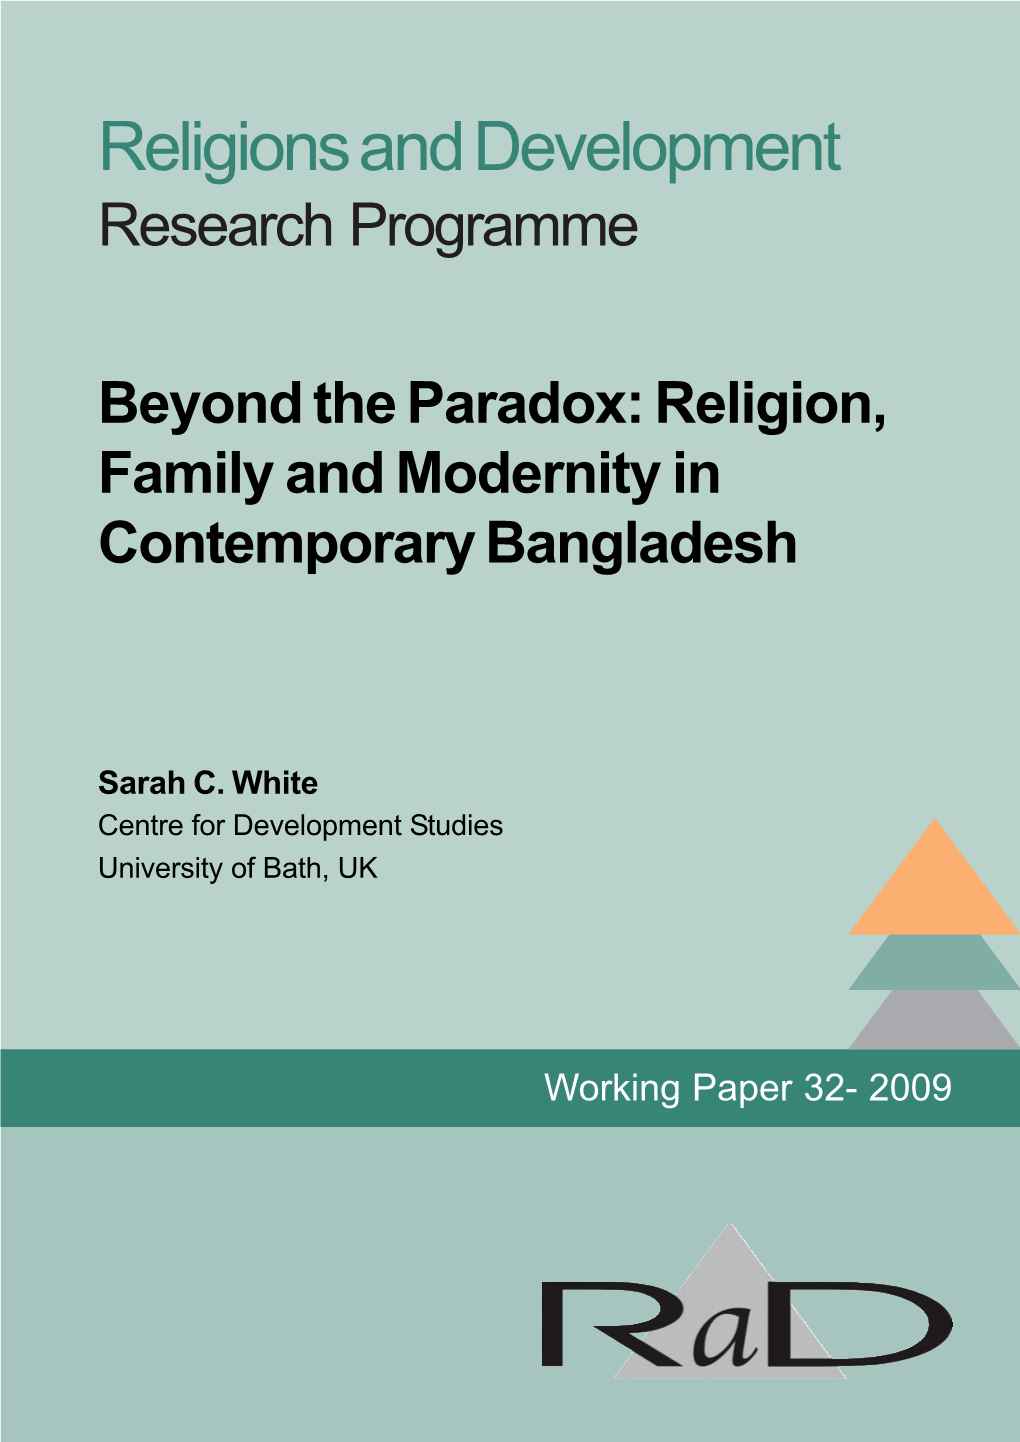 Religion, Family and Modernity in Contemporary Bangladesh